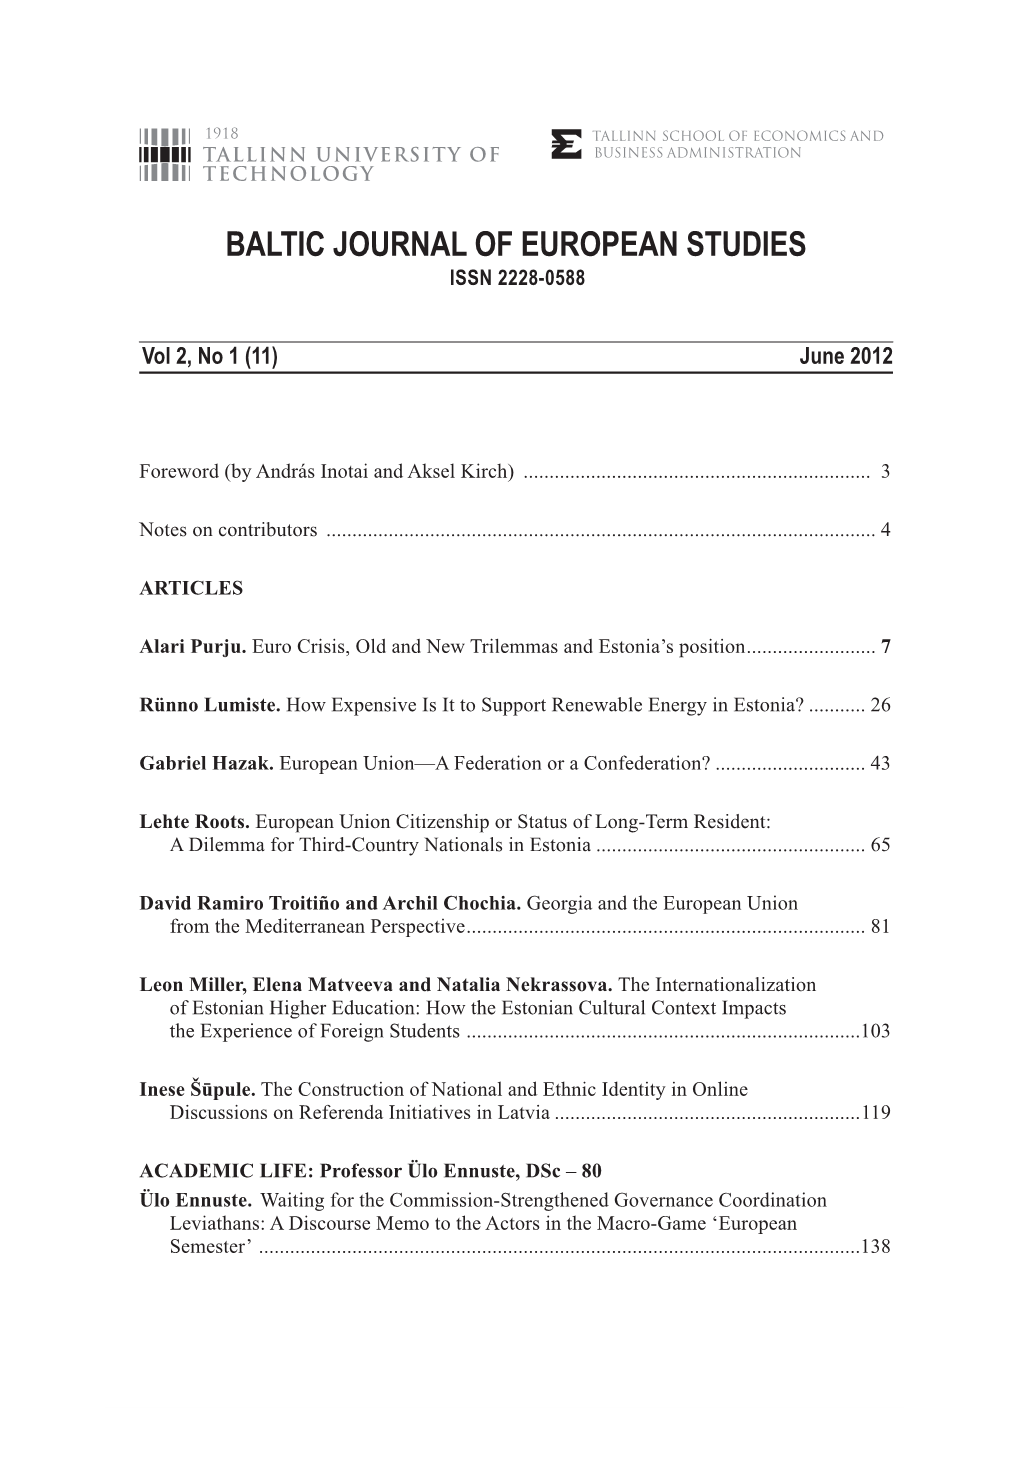 Journal Title and the Articles (Pdf)